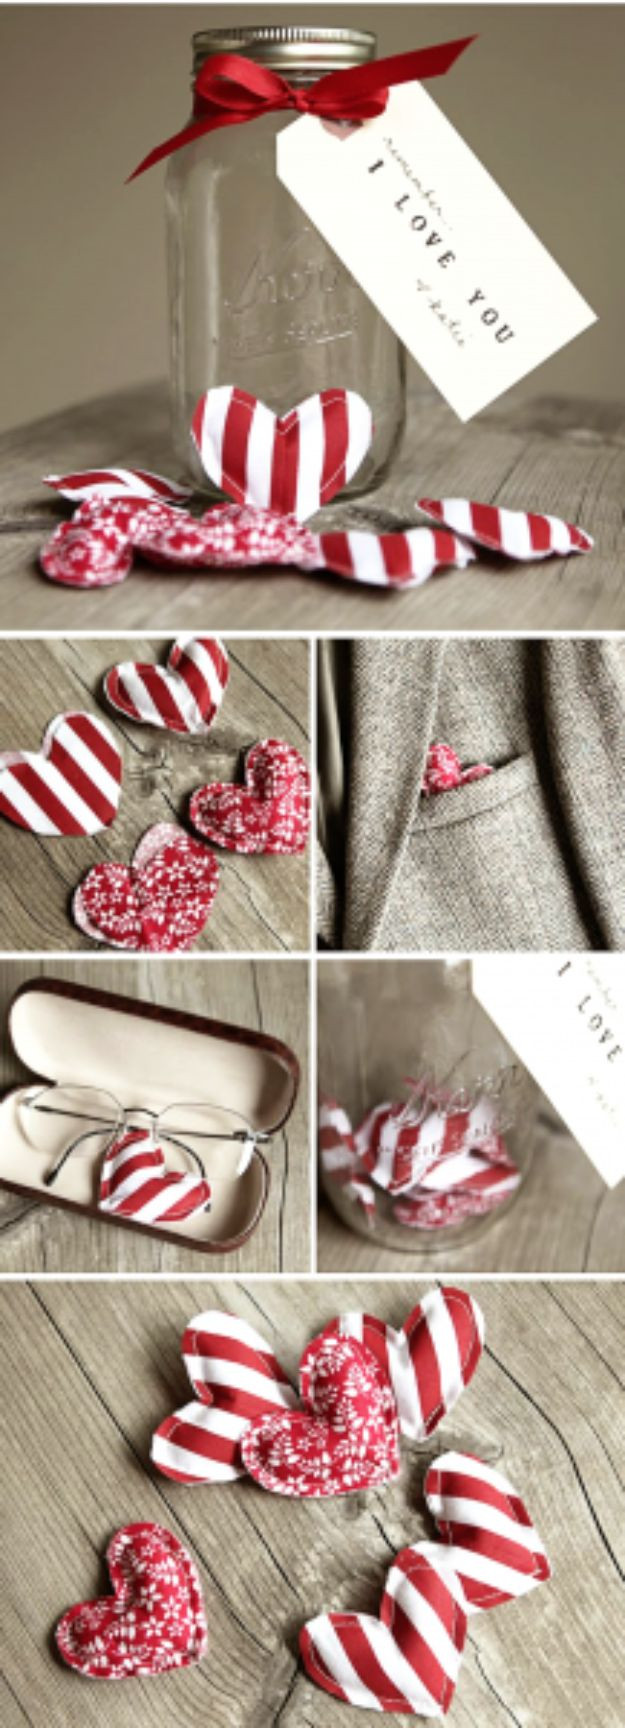 Gift Ideas For Her Valentines
 34 DIY Valentine s Gift Ideas for Her